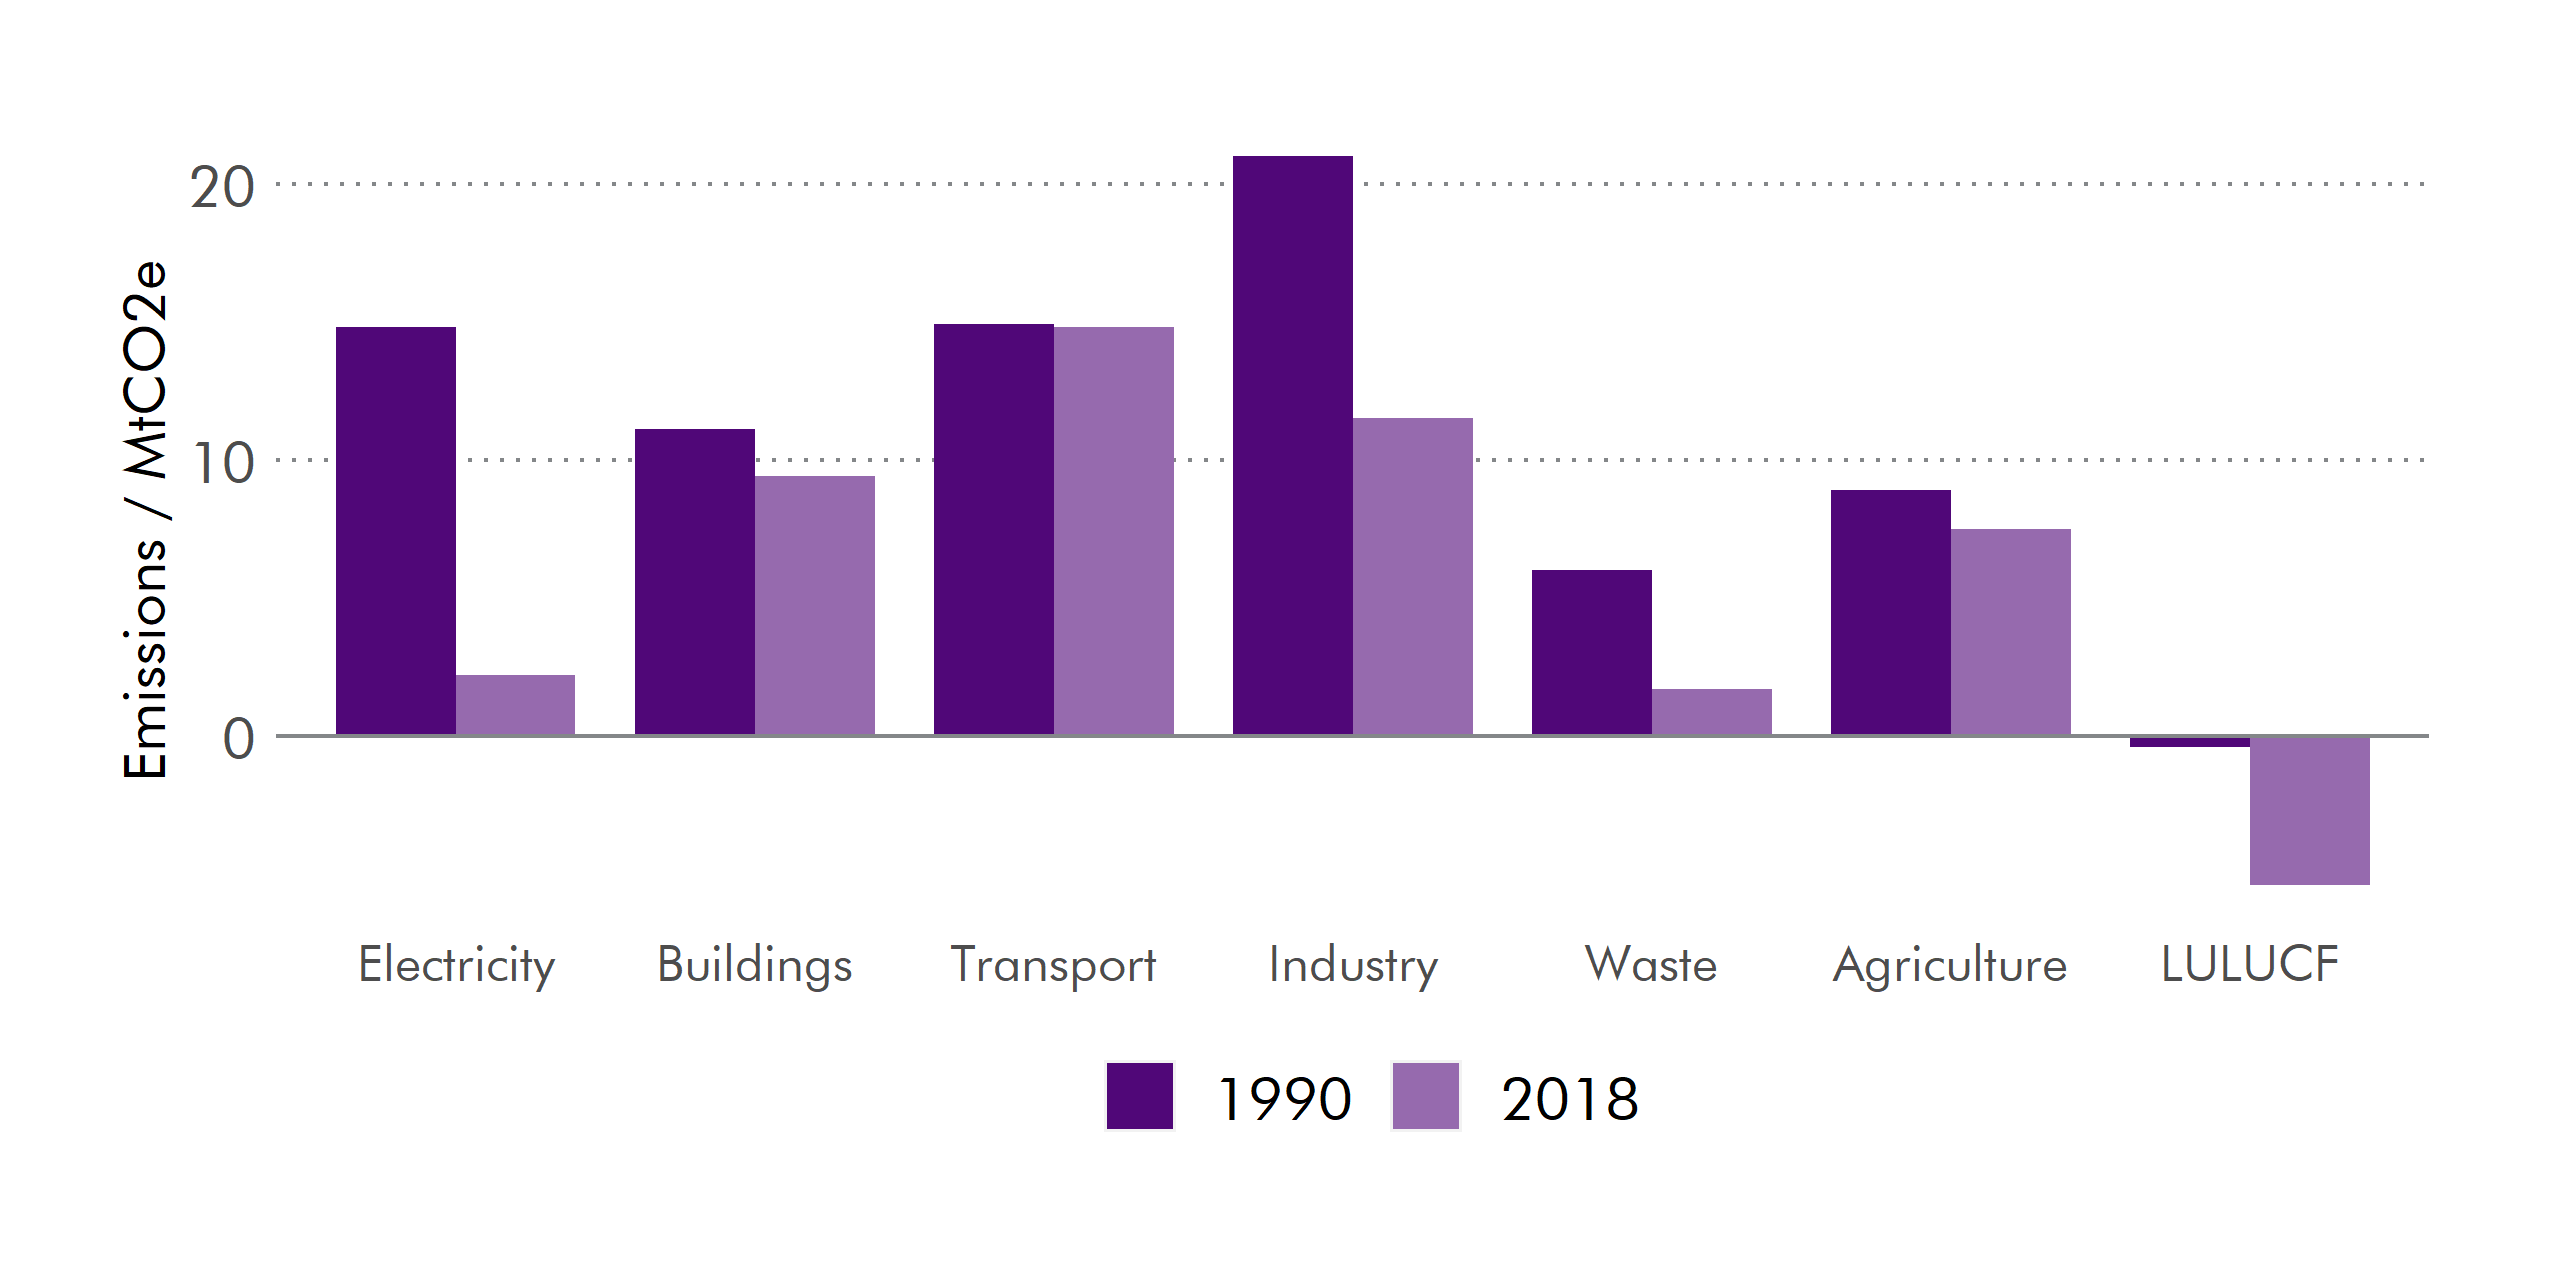 Since 1990, emissions have reduced notably in the electricity, industry and waste sectors, but far less so in buildings, transport and agriculture